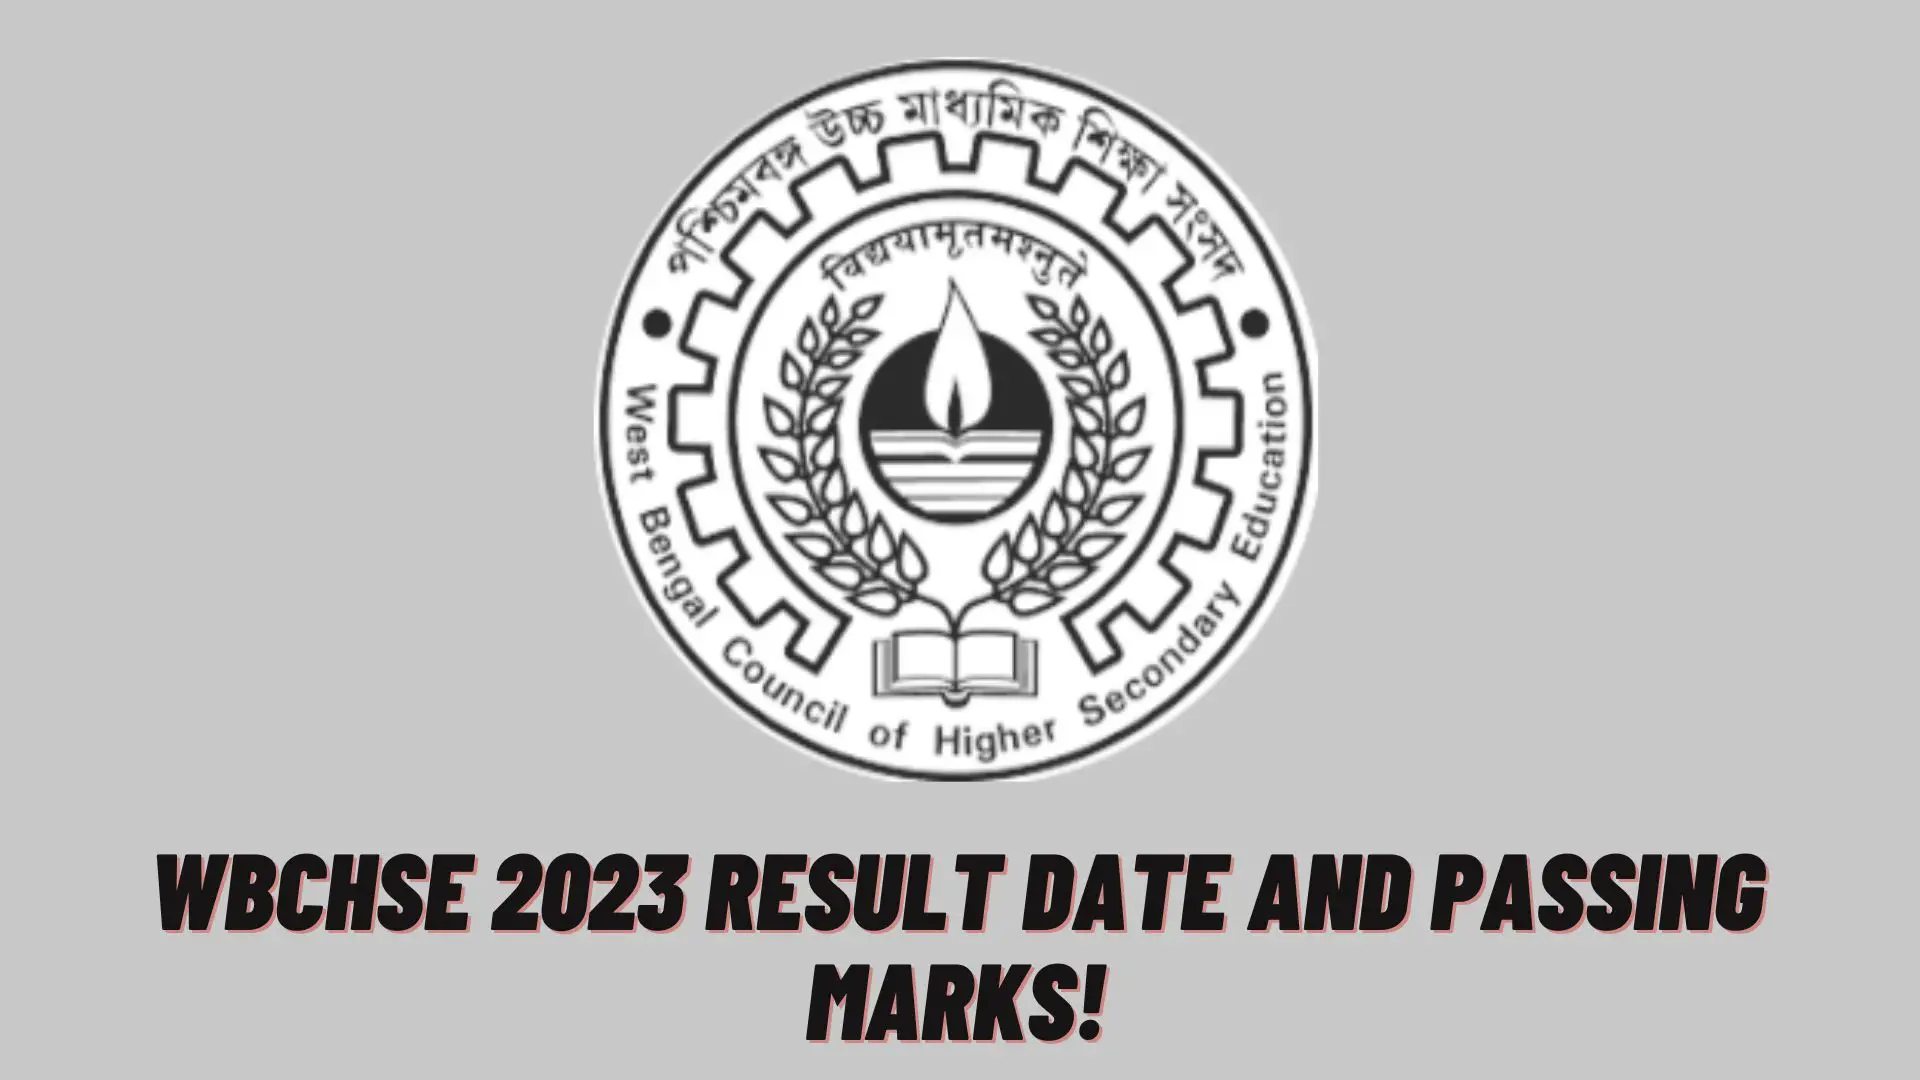 WBCHSE 2023 Result Date And Passing Marks!